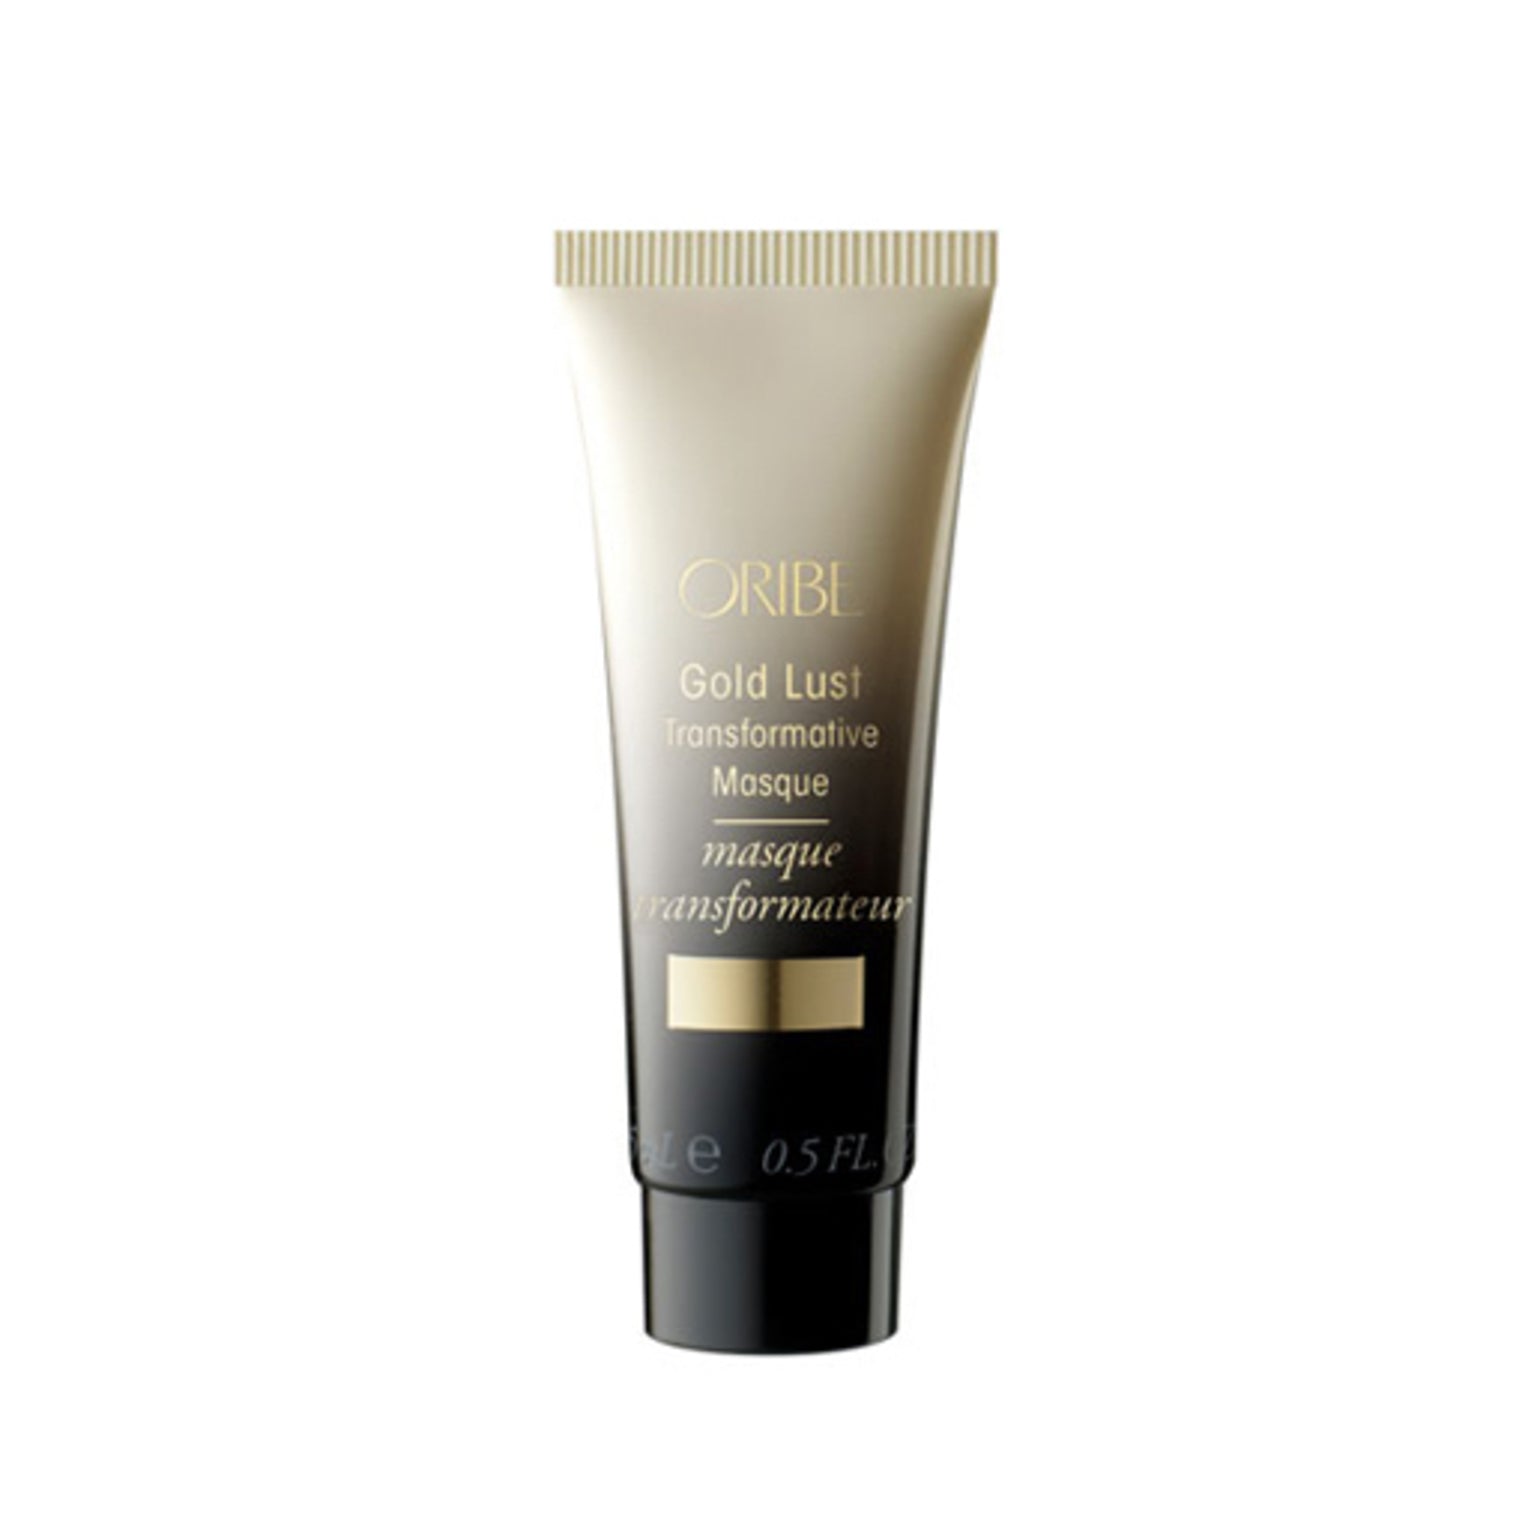 Gold Lust Transformative Masque Deluxe Sample